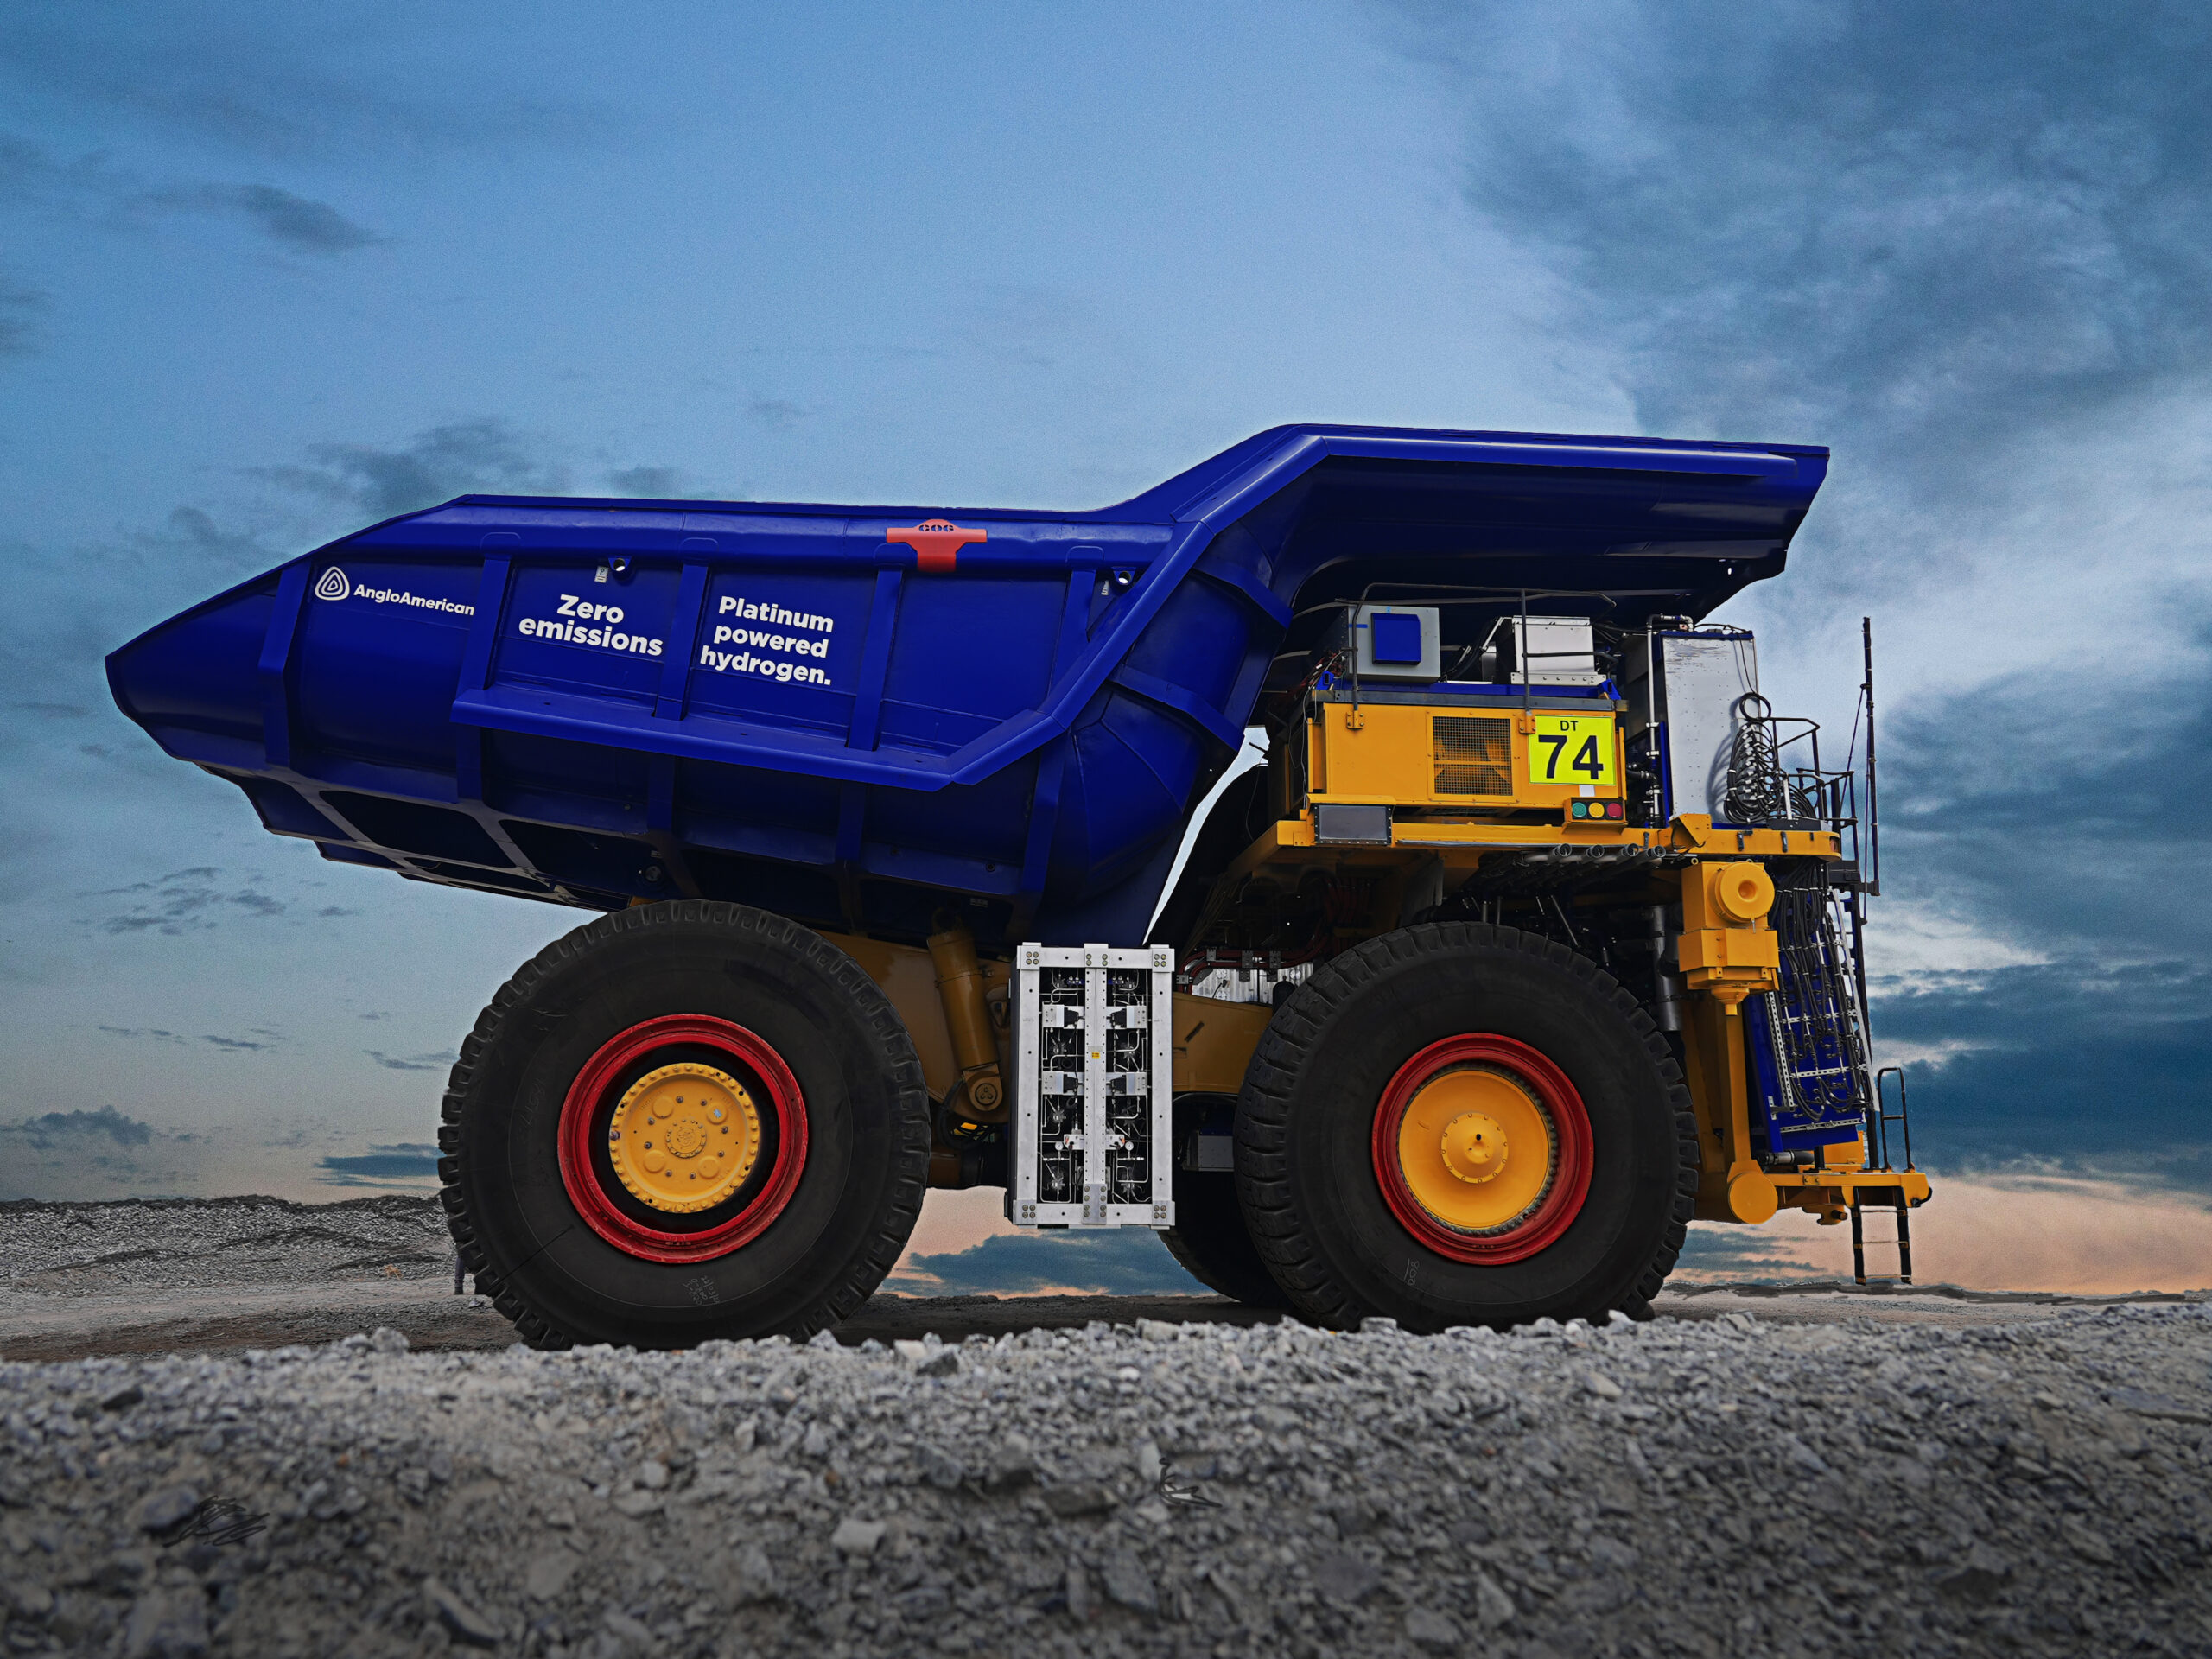 An ultra-class haul truck that's three-stories tall retrofitted with a diesel-free engine by First Mode.